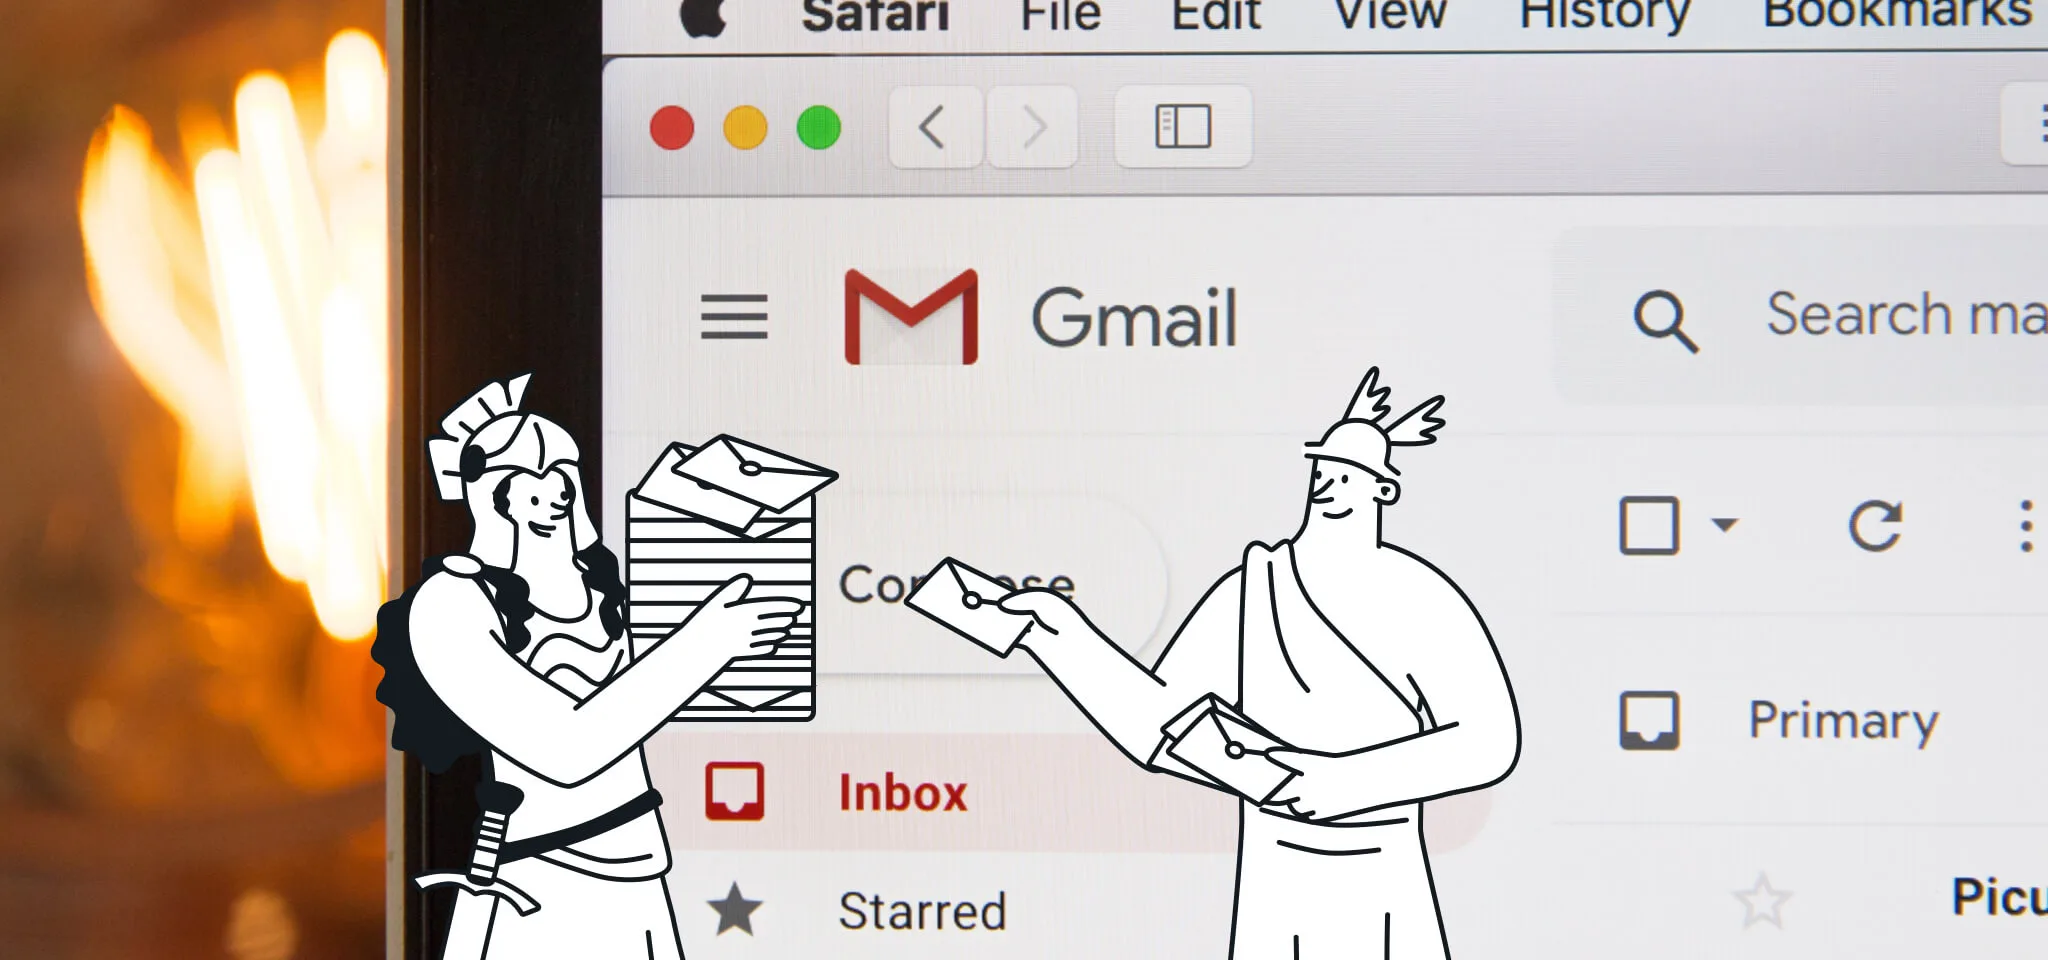 mailjet:-what-is-the-gmail-automated-unsubscribe-feature?